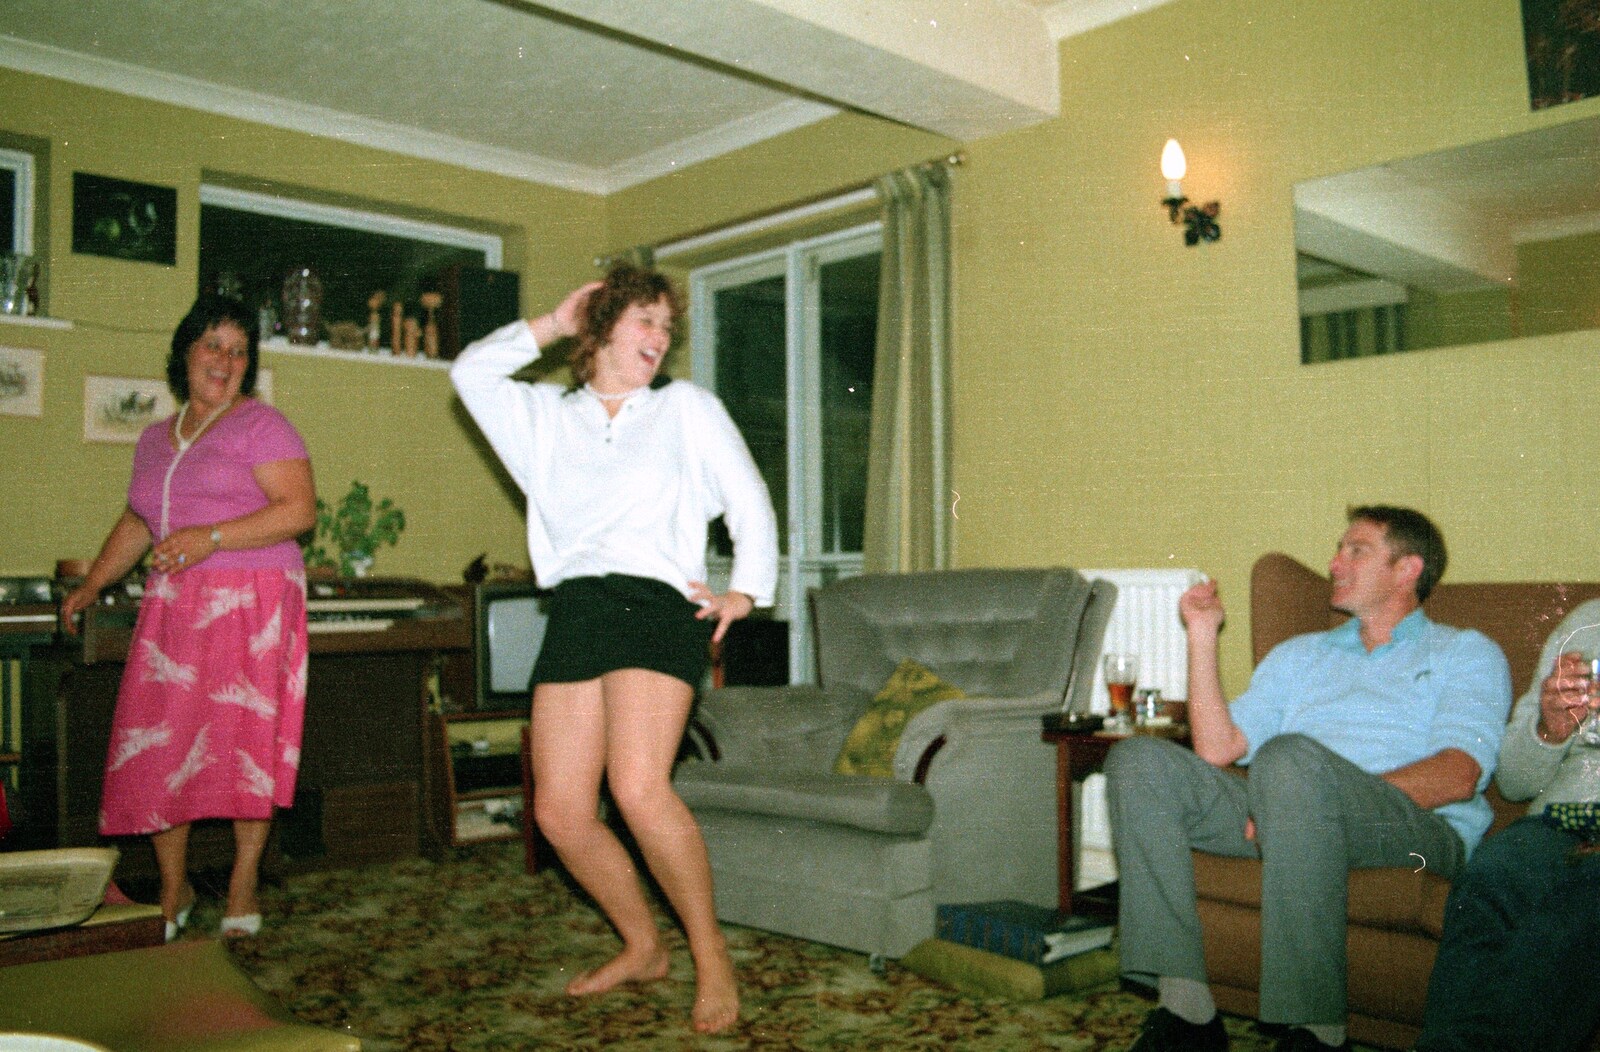 More crazy dancing from A CB Radio Party, Stem Lane, New Milton - 15th July 1986